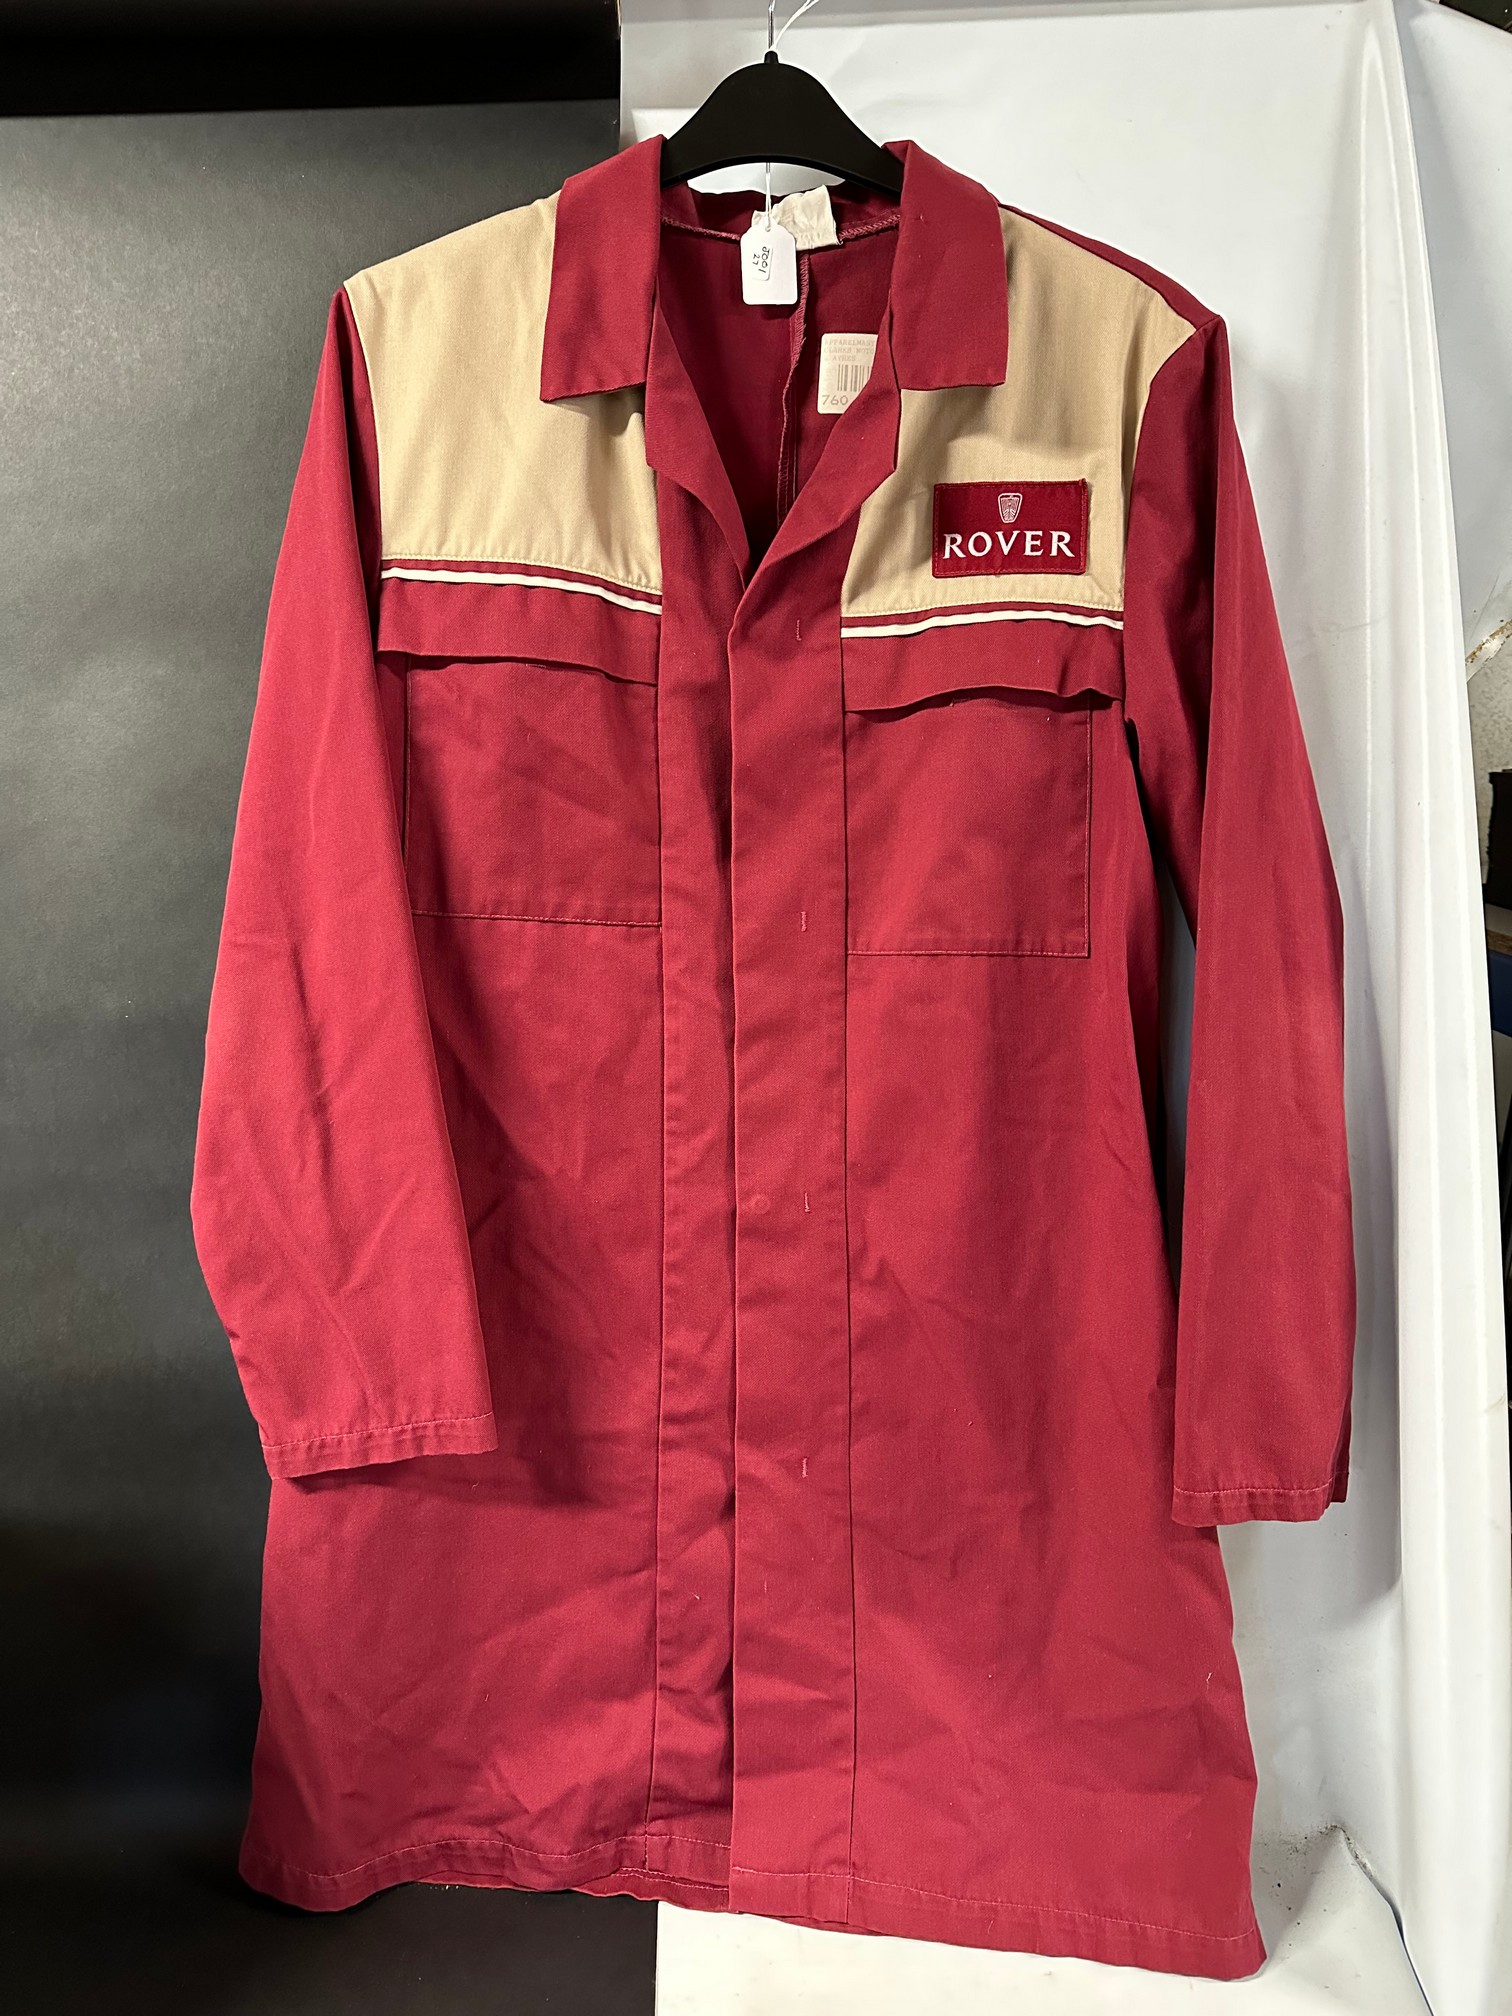 A Rover mechanic's overall, cotton, n.o.s.